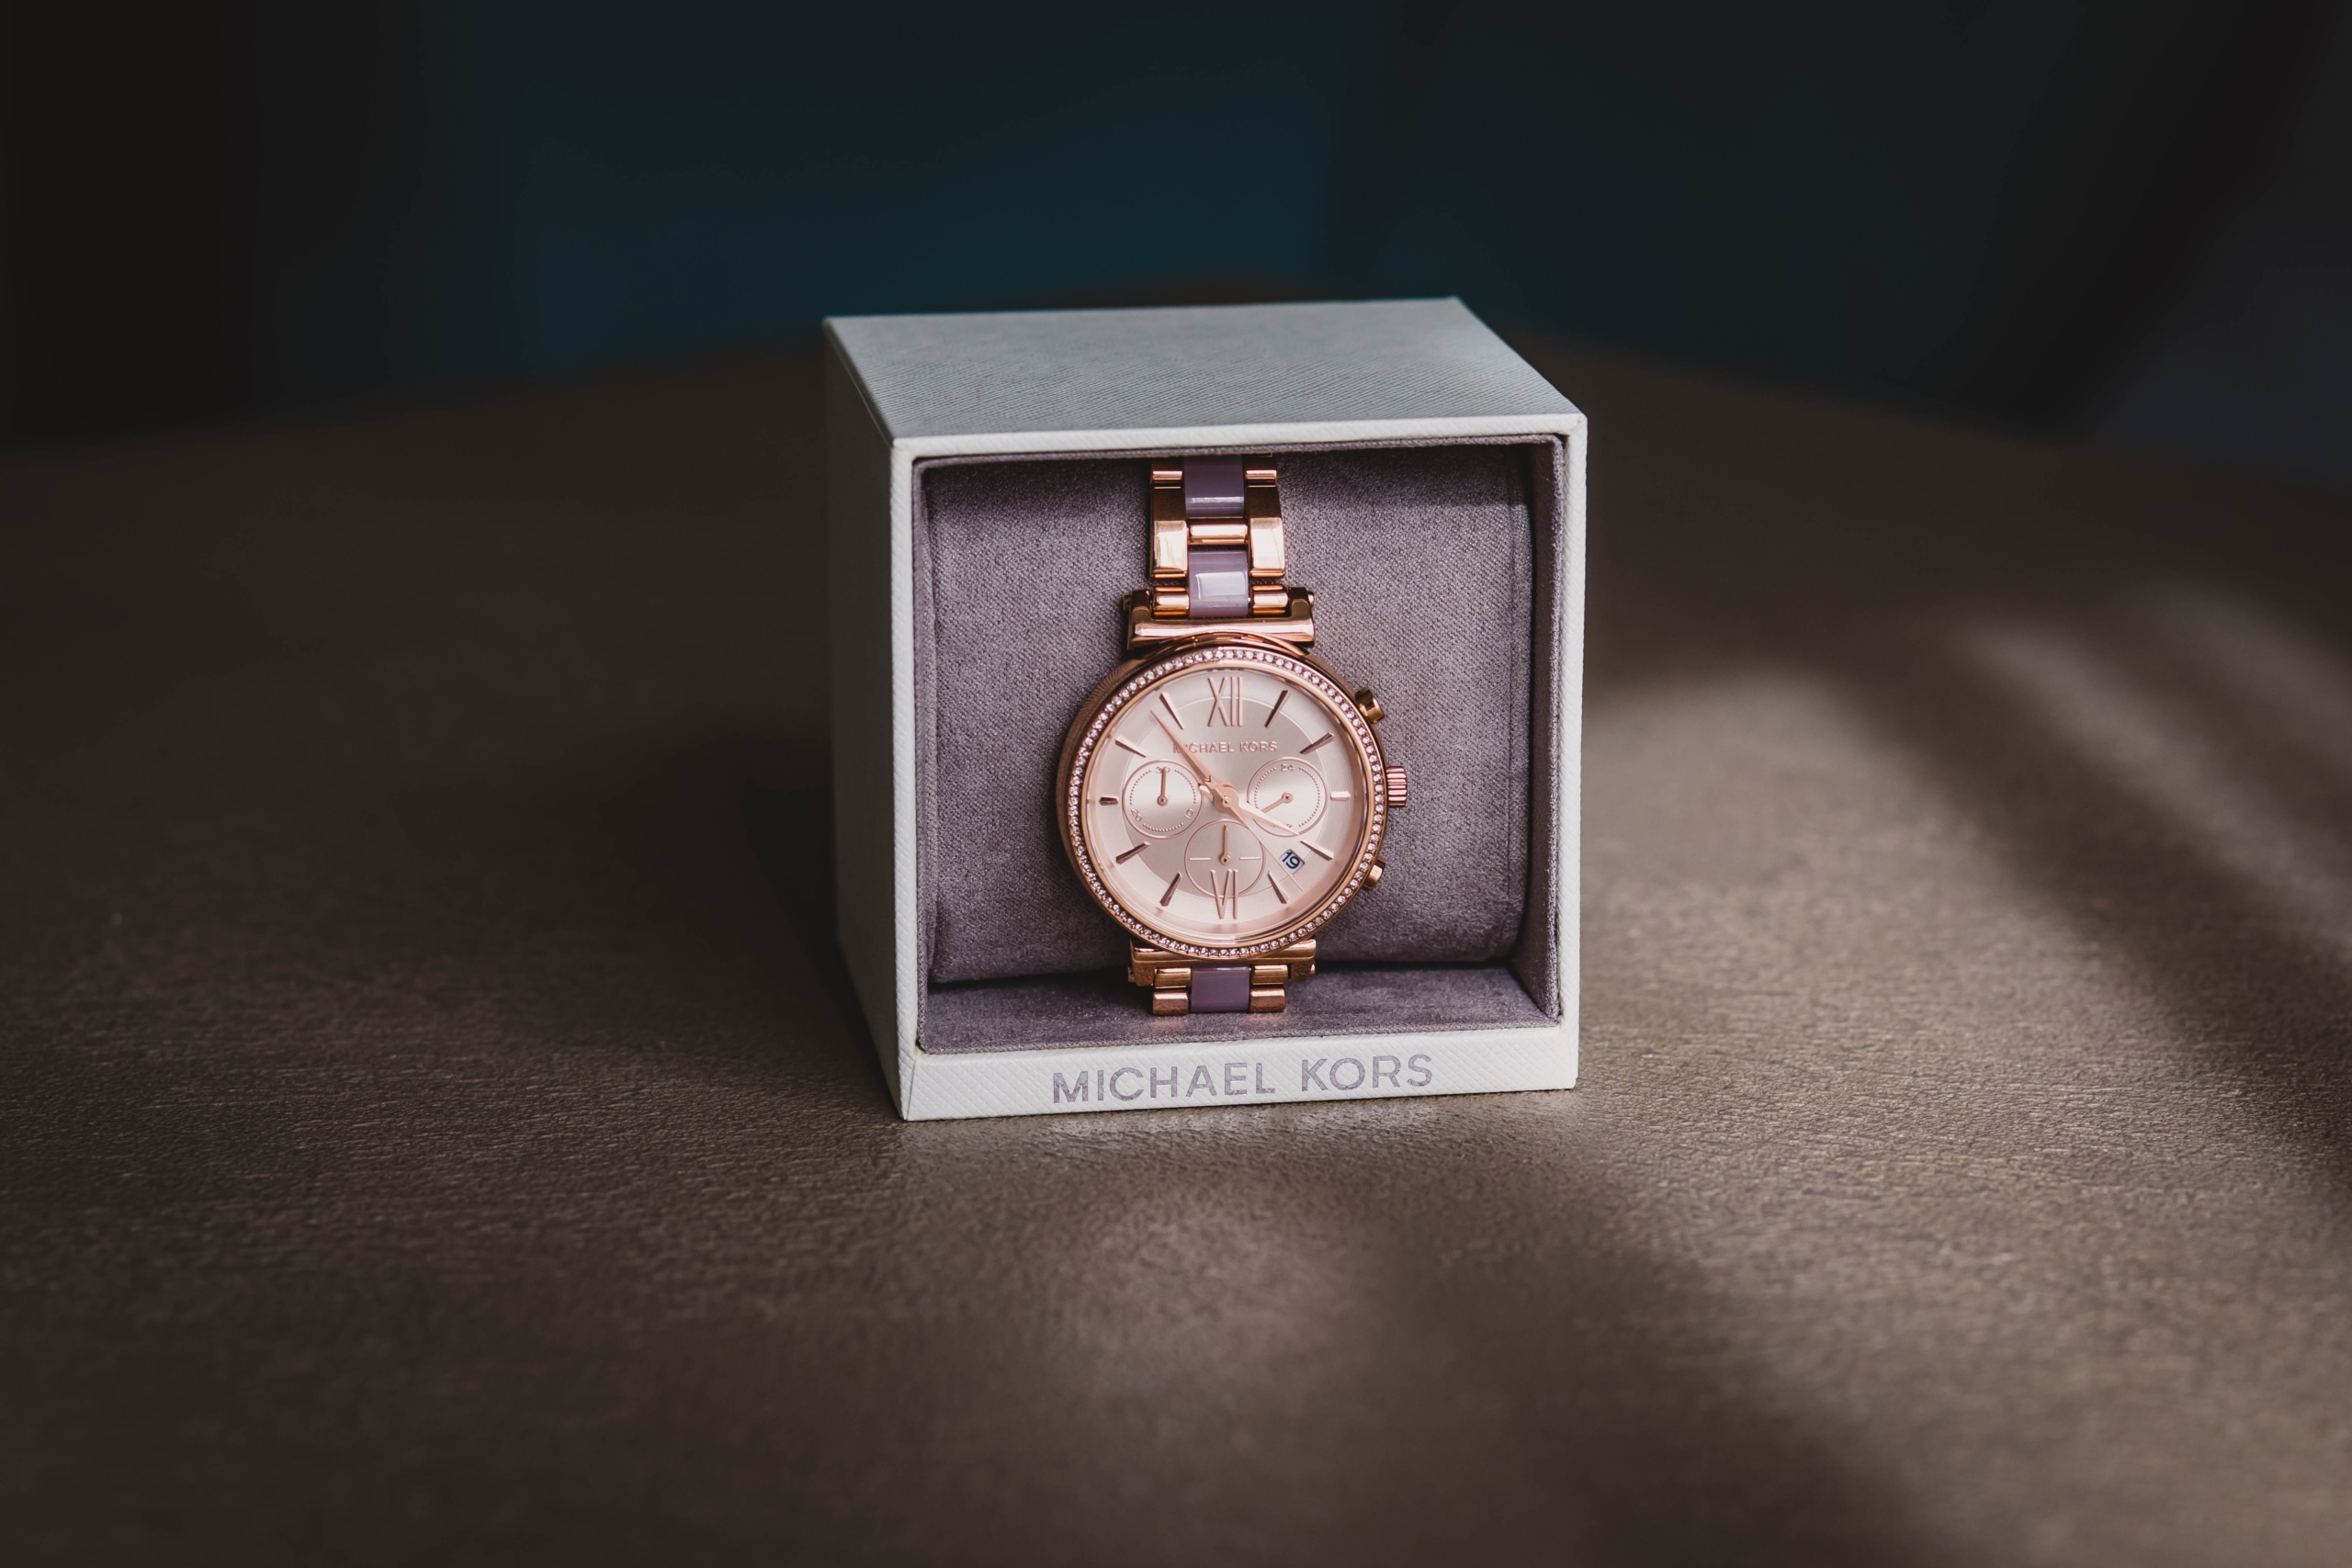 Watch in a box - Product Photography Styles